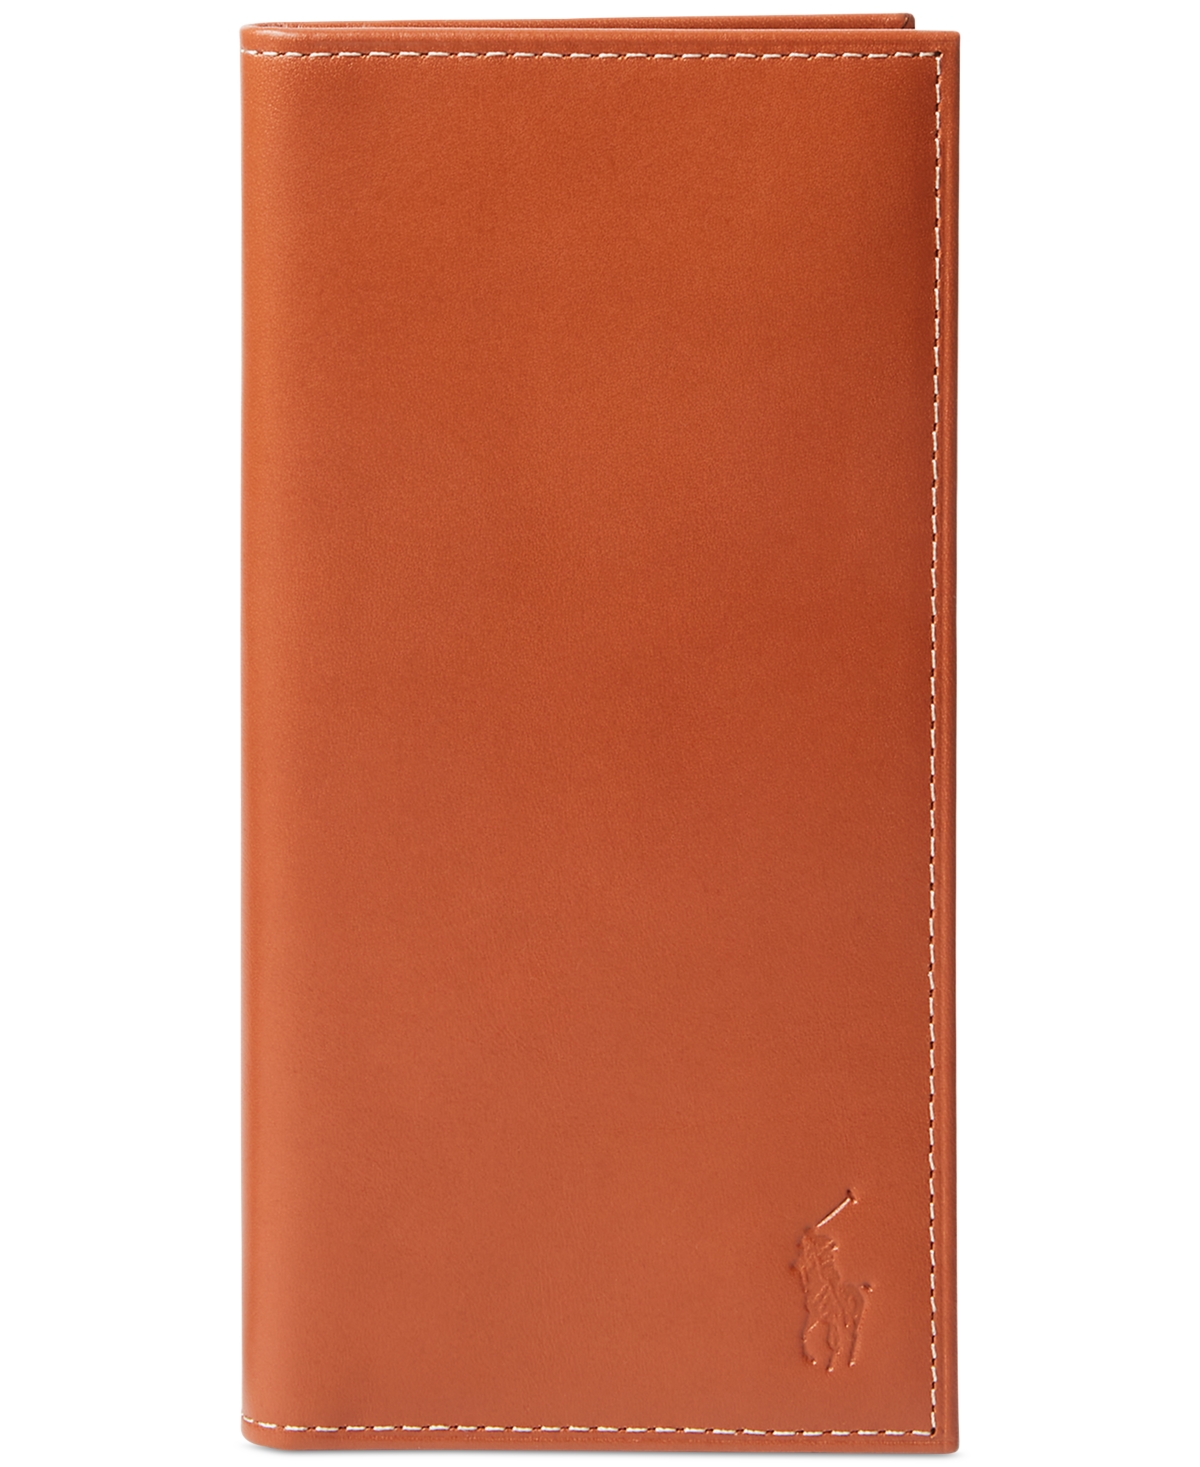 Men's Burnished Leather Narrow Wallet - Brown